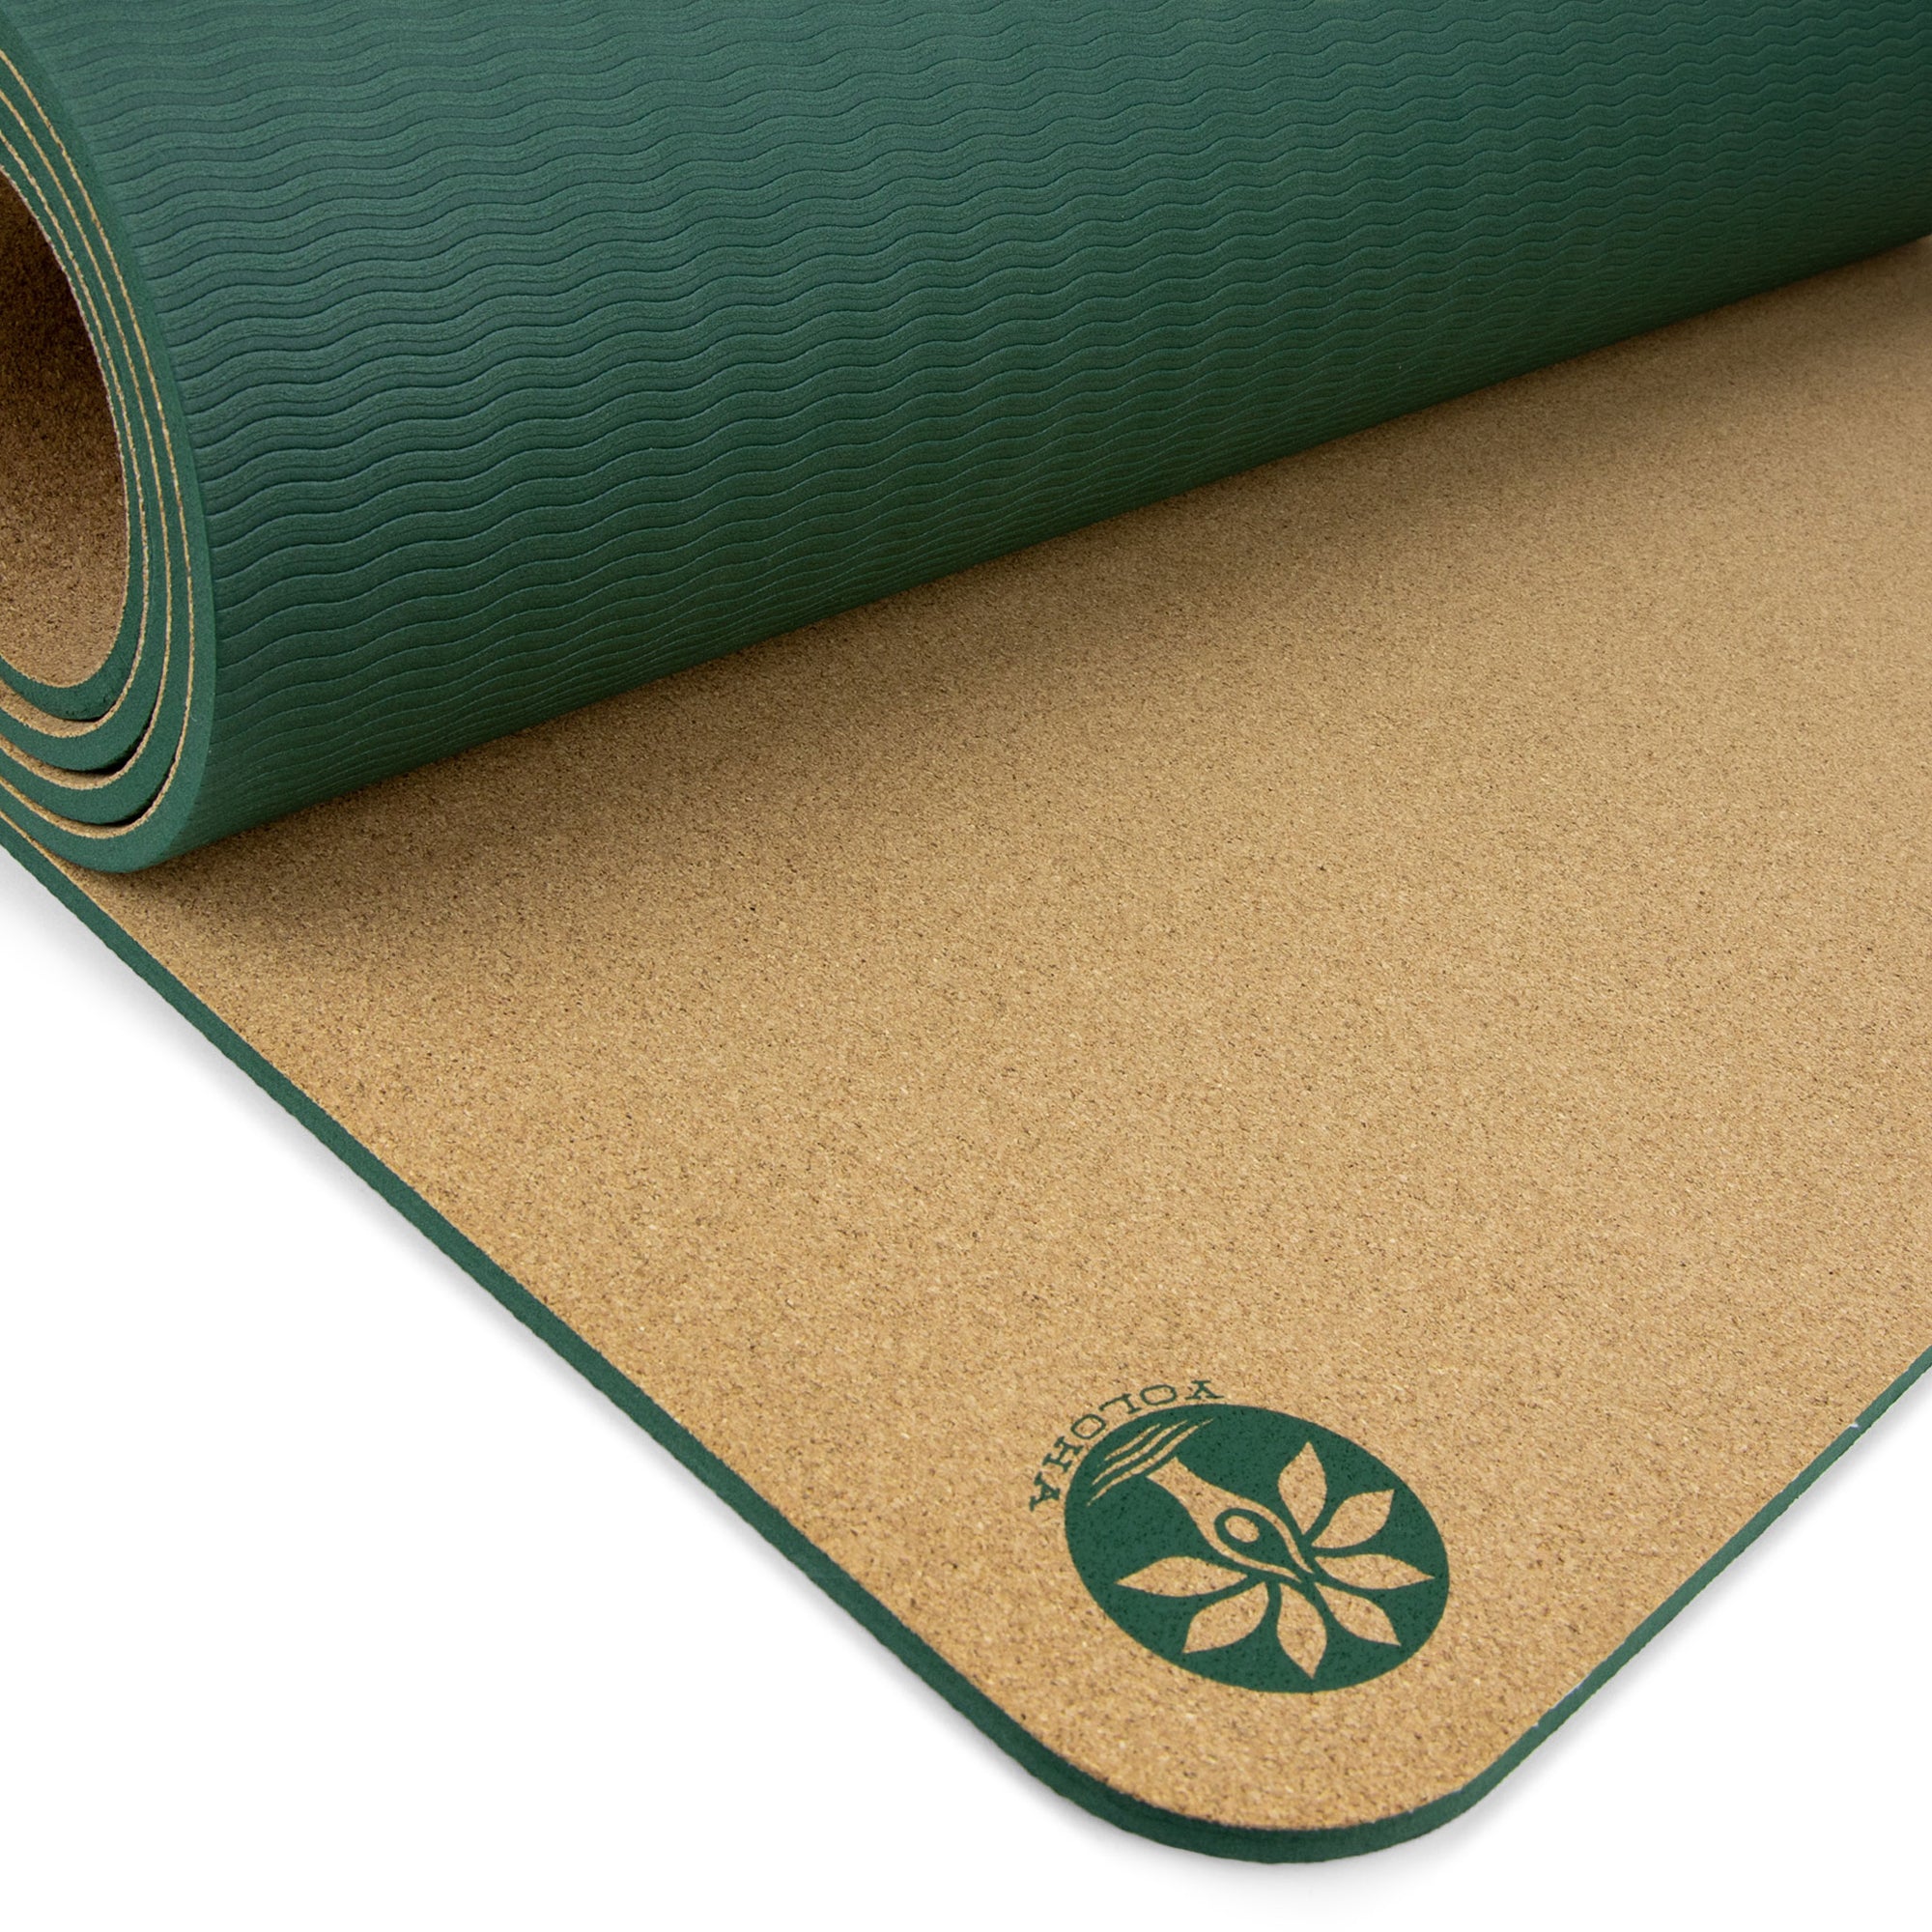 Eco-Friendly Yoga Mat Made with Natural Cork and Plant Foam